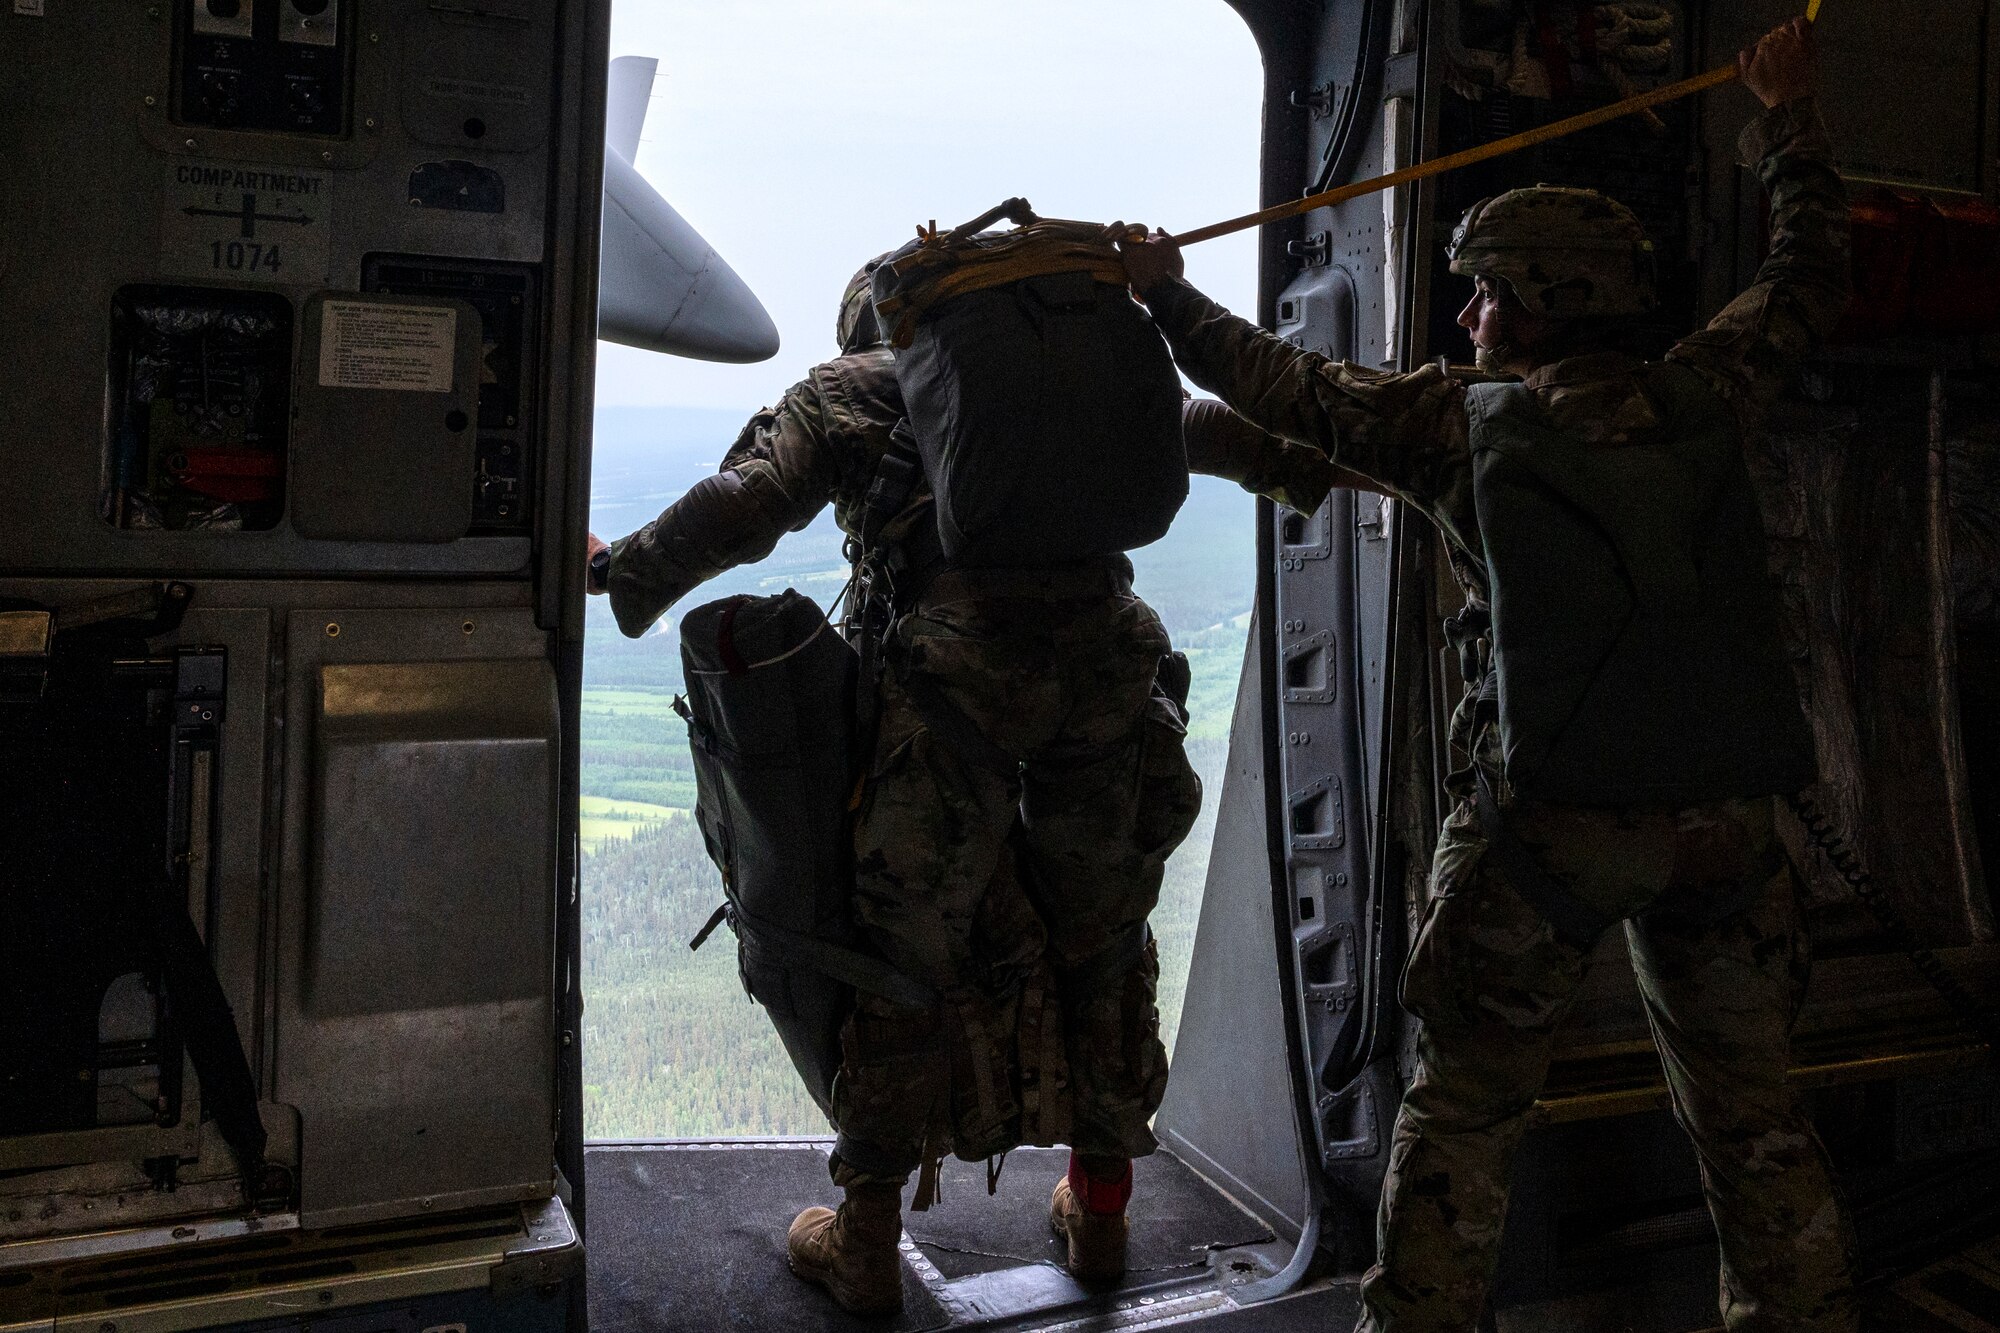 U.S. Army Sgt. 1st Class Charlie Arrendale, looks out the door as they prepare to jump from a C-17 Globemaster III from the 517th Airlift Squadron over Allen Army Airfield, Fort Greely, Alaska, June 15, 2022. RF-A provides realistic combat training by integrating joint, coalition and multilateral forces into simulated forward operating bases. Arrendale is assigned to the 3rd Battalion, 509th Infantry Regiment, 2nd Infantry Brigade Combat Team (Airborne), 11th Airborne Division. (U.S. Air Force photo by Sheila deVera)